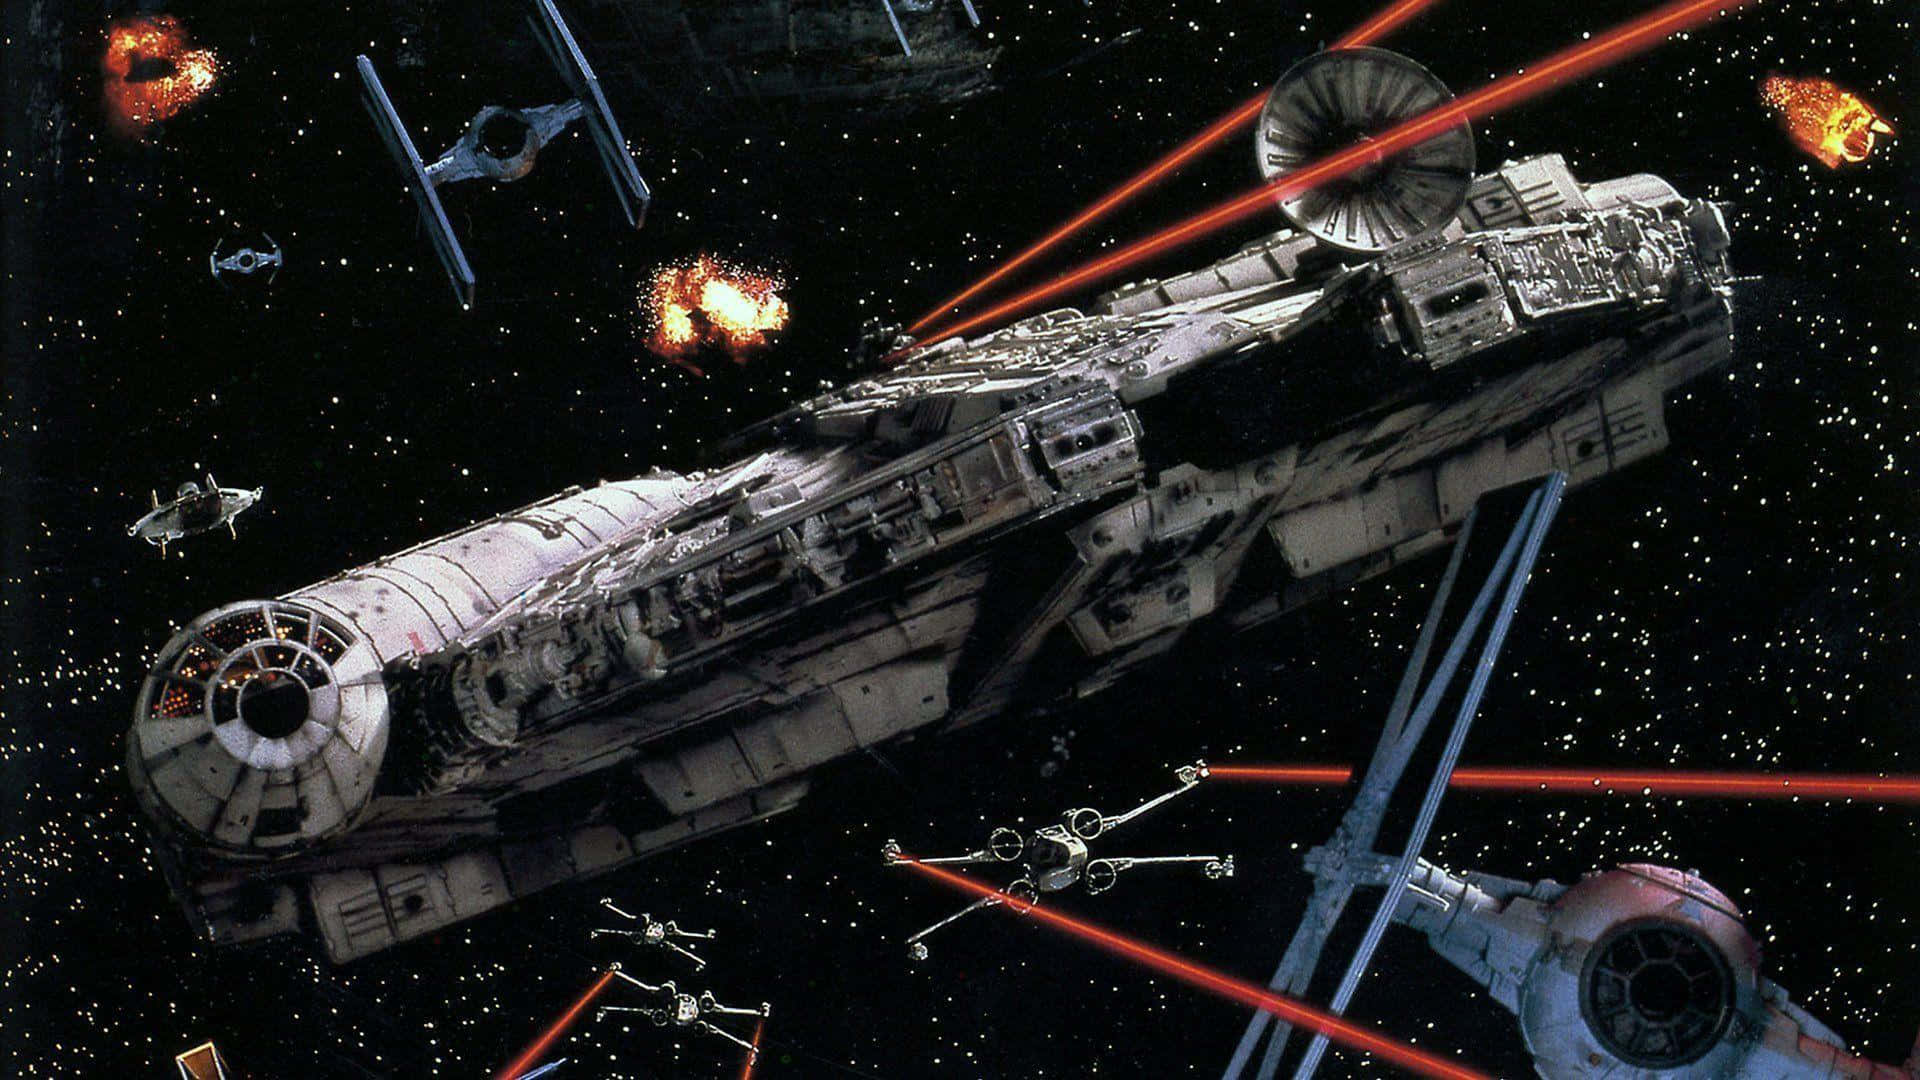 "Travel Through the Galaxy in the Fastest Ship Around - The Millenium Falcon" Wallpaper